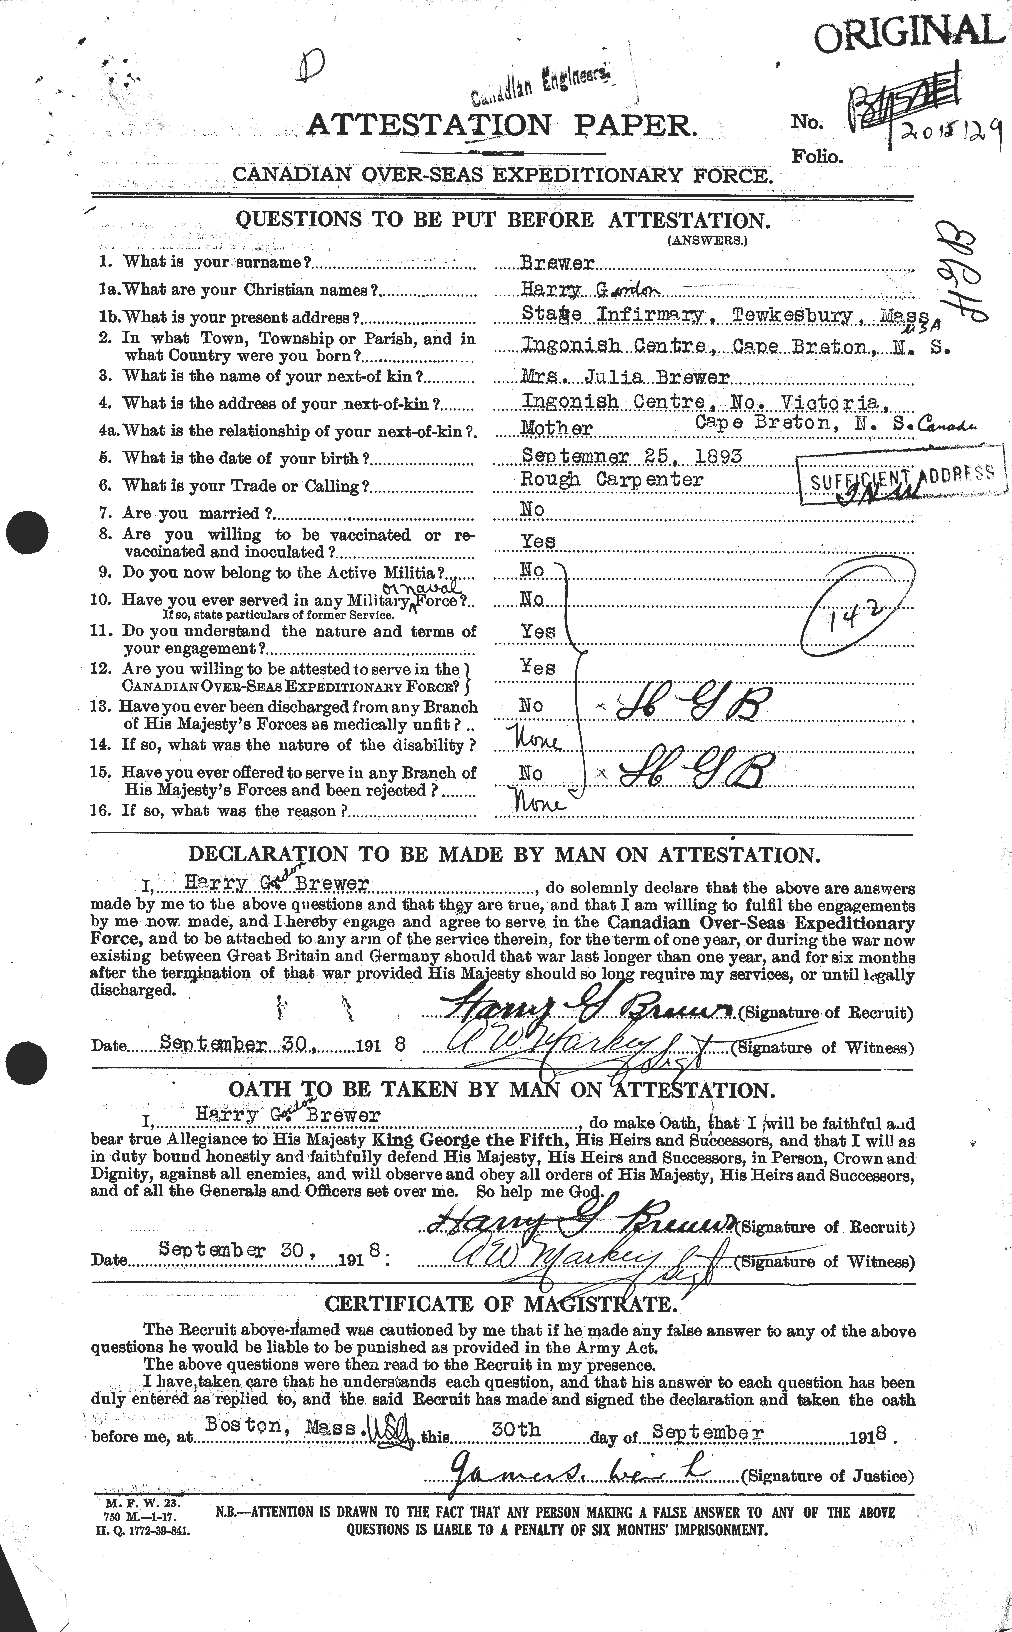 Personnel Records of the First World War - CEF 260757a